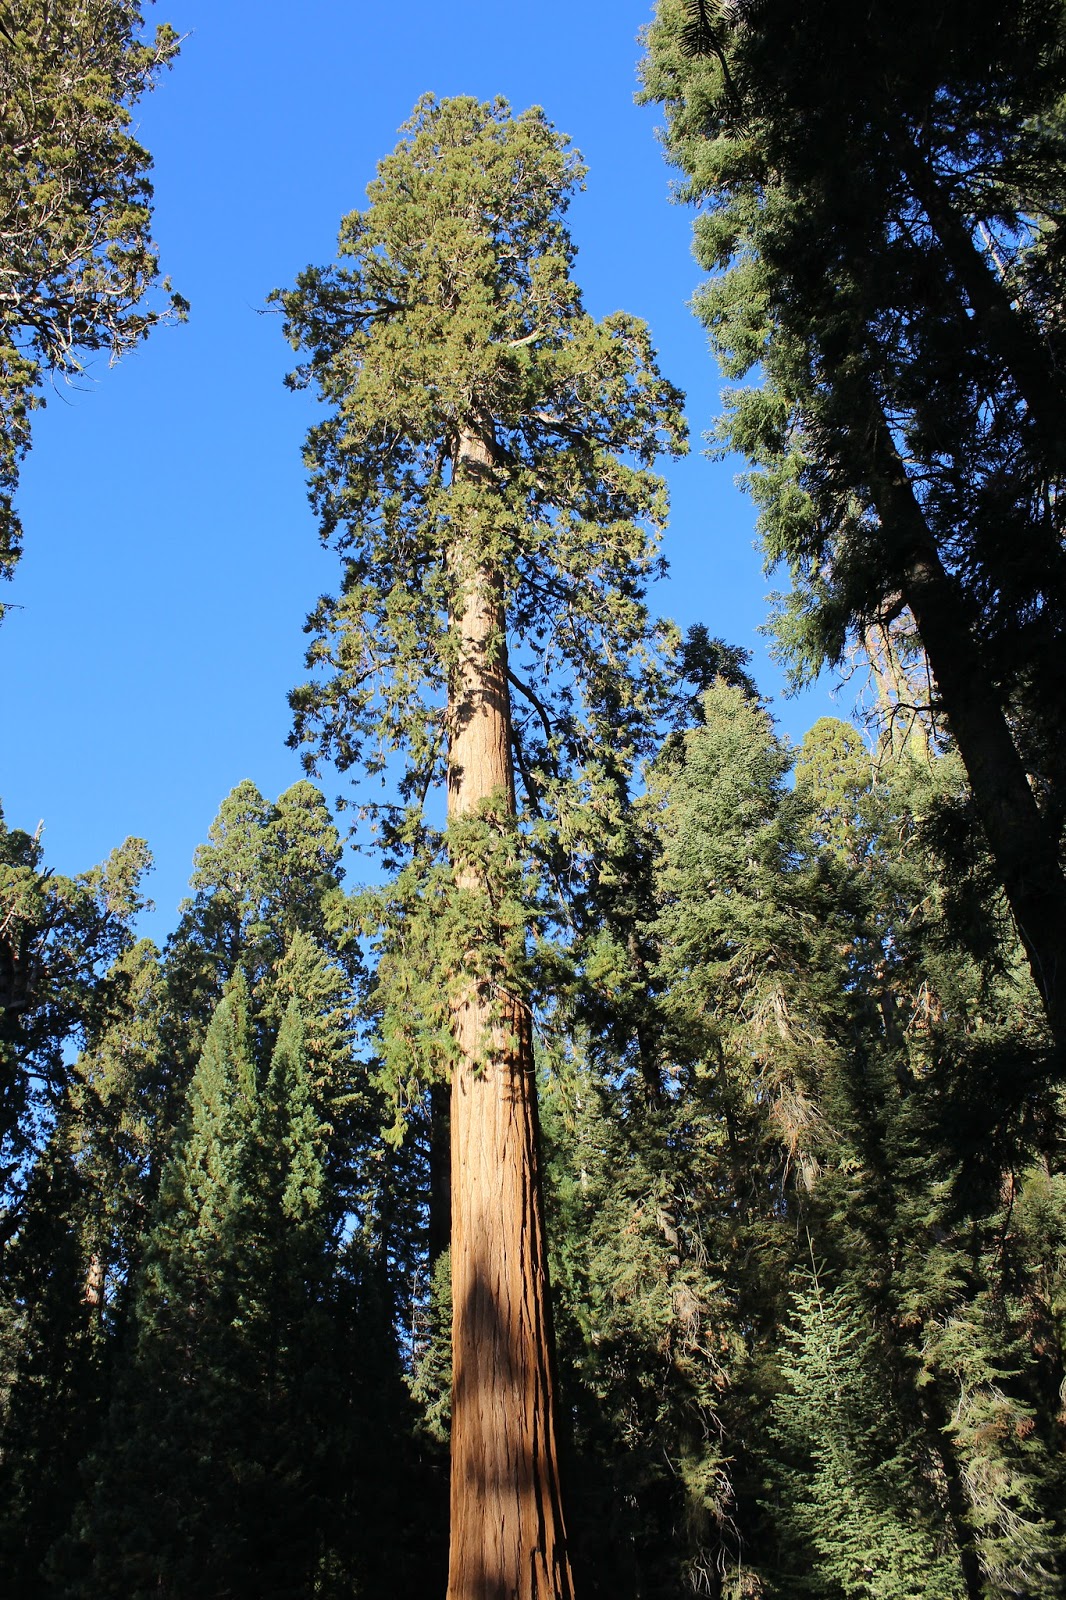 Which is the tallest tree in the world discovered | List of the tallest tree in the world.